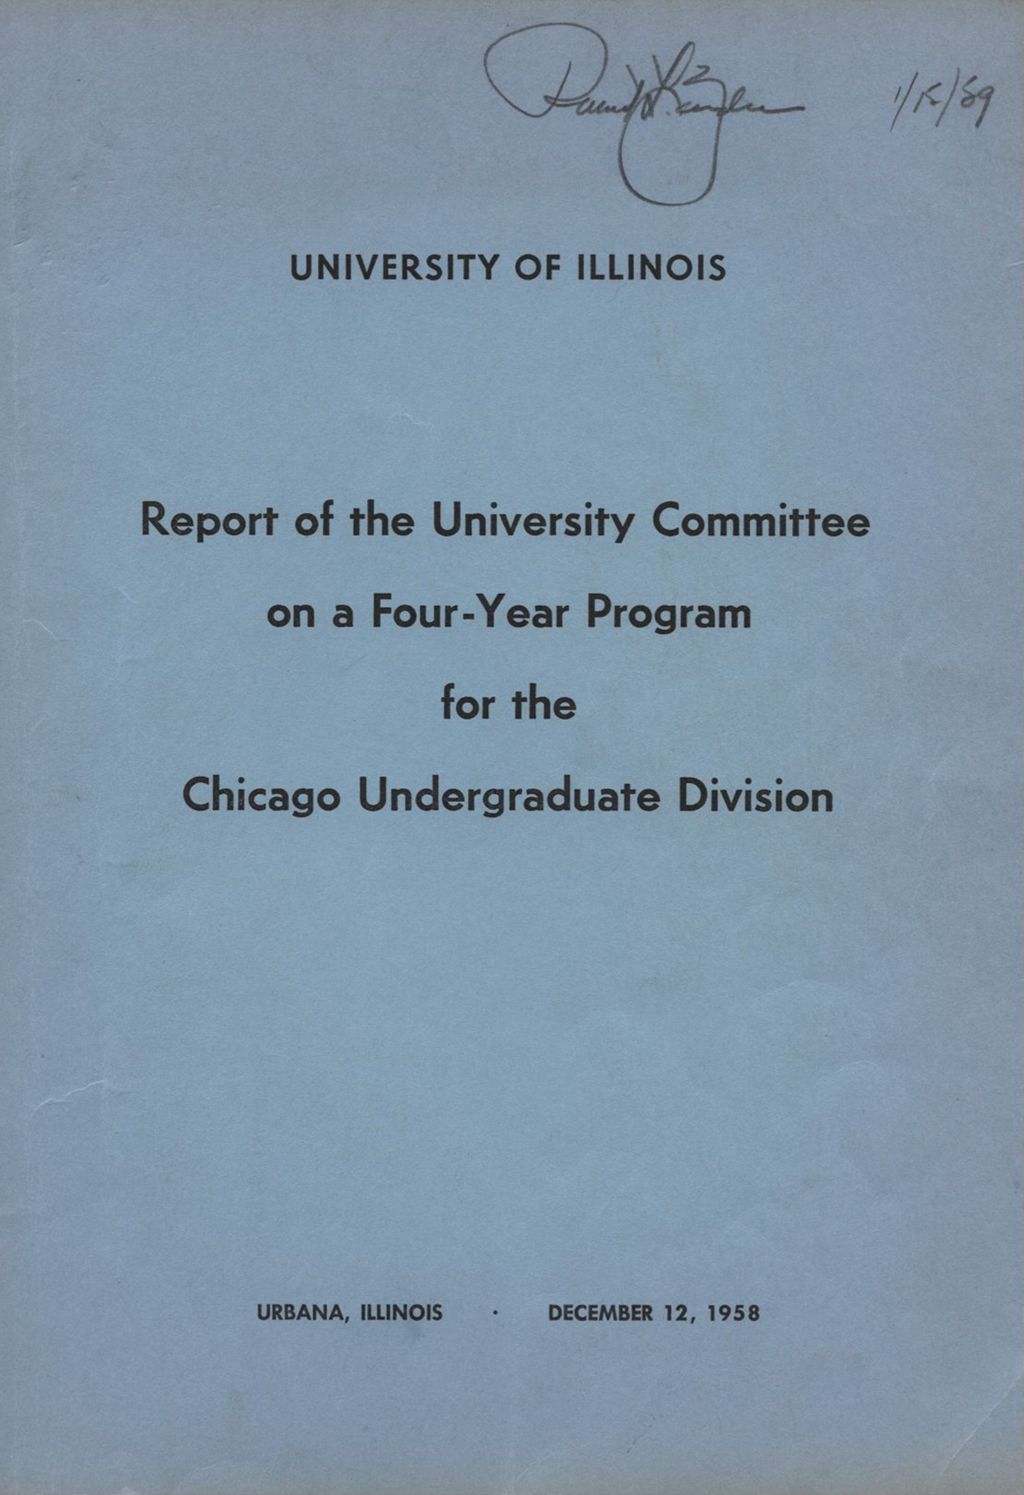 Miniature of Report of the University Committee on a Four-Year Program for the Chicago Undergraduate Division. Urbana, Illinois